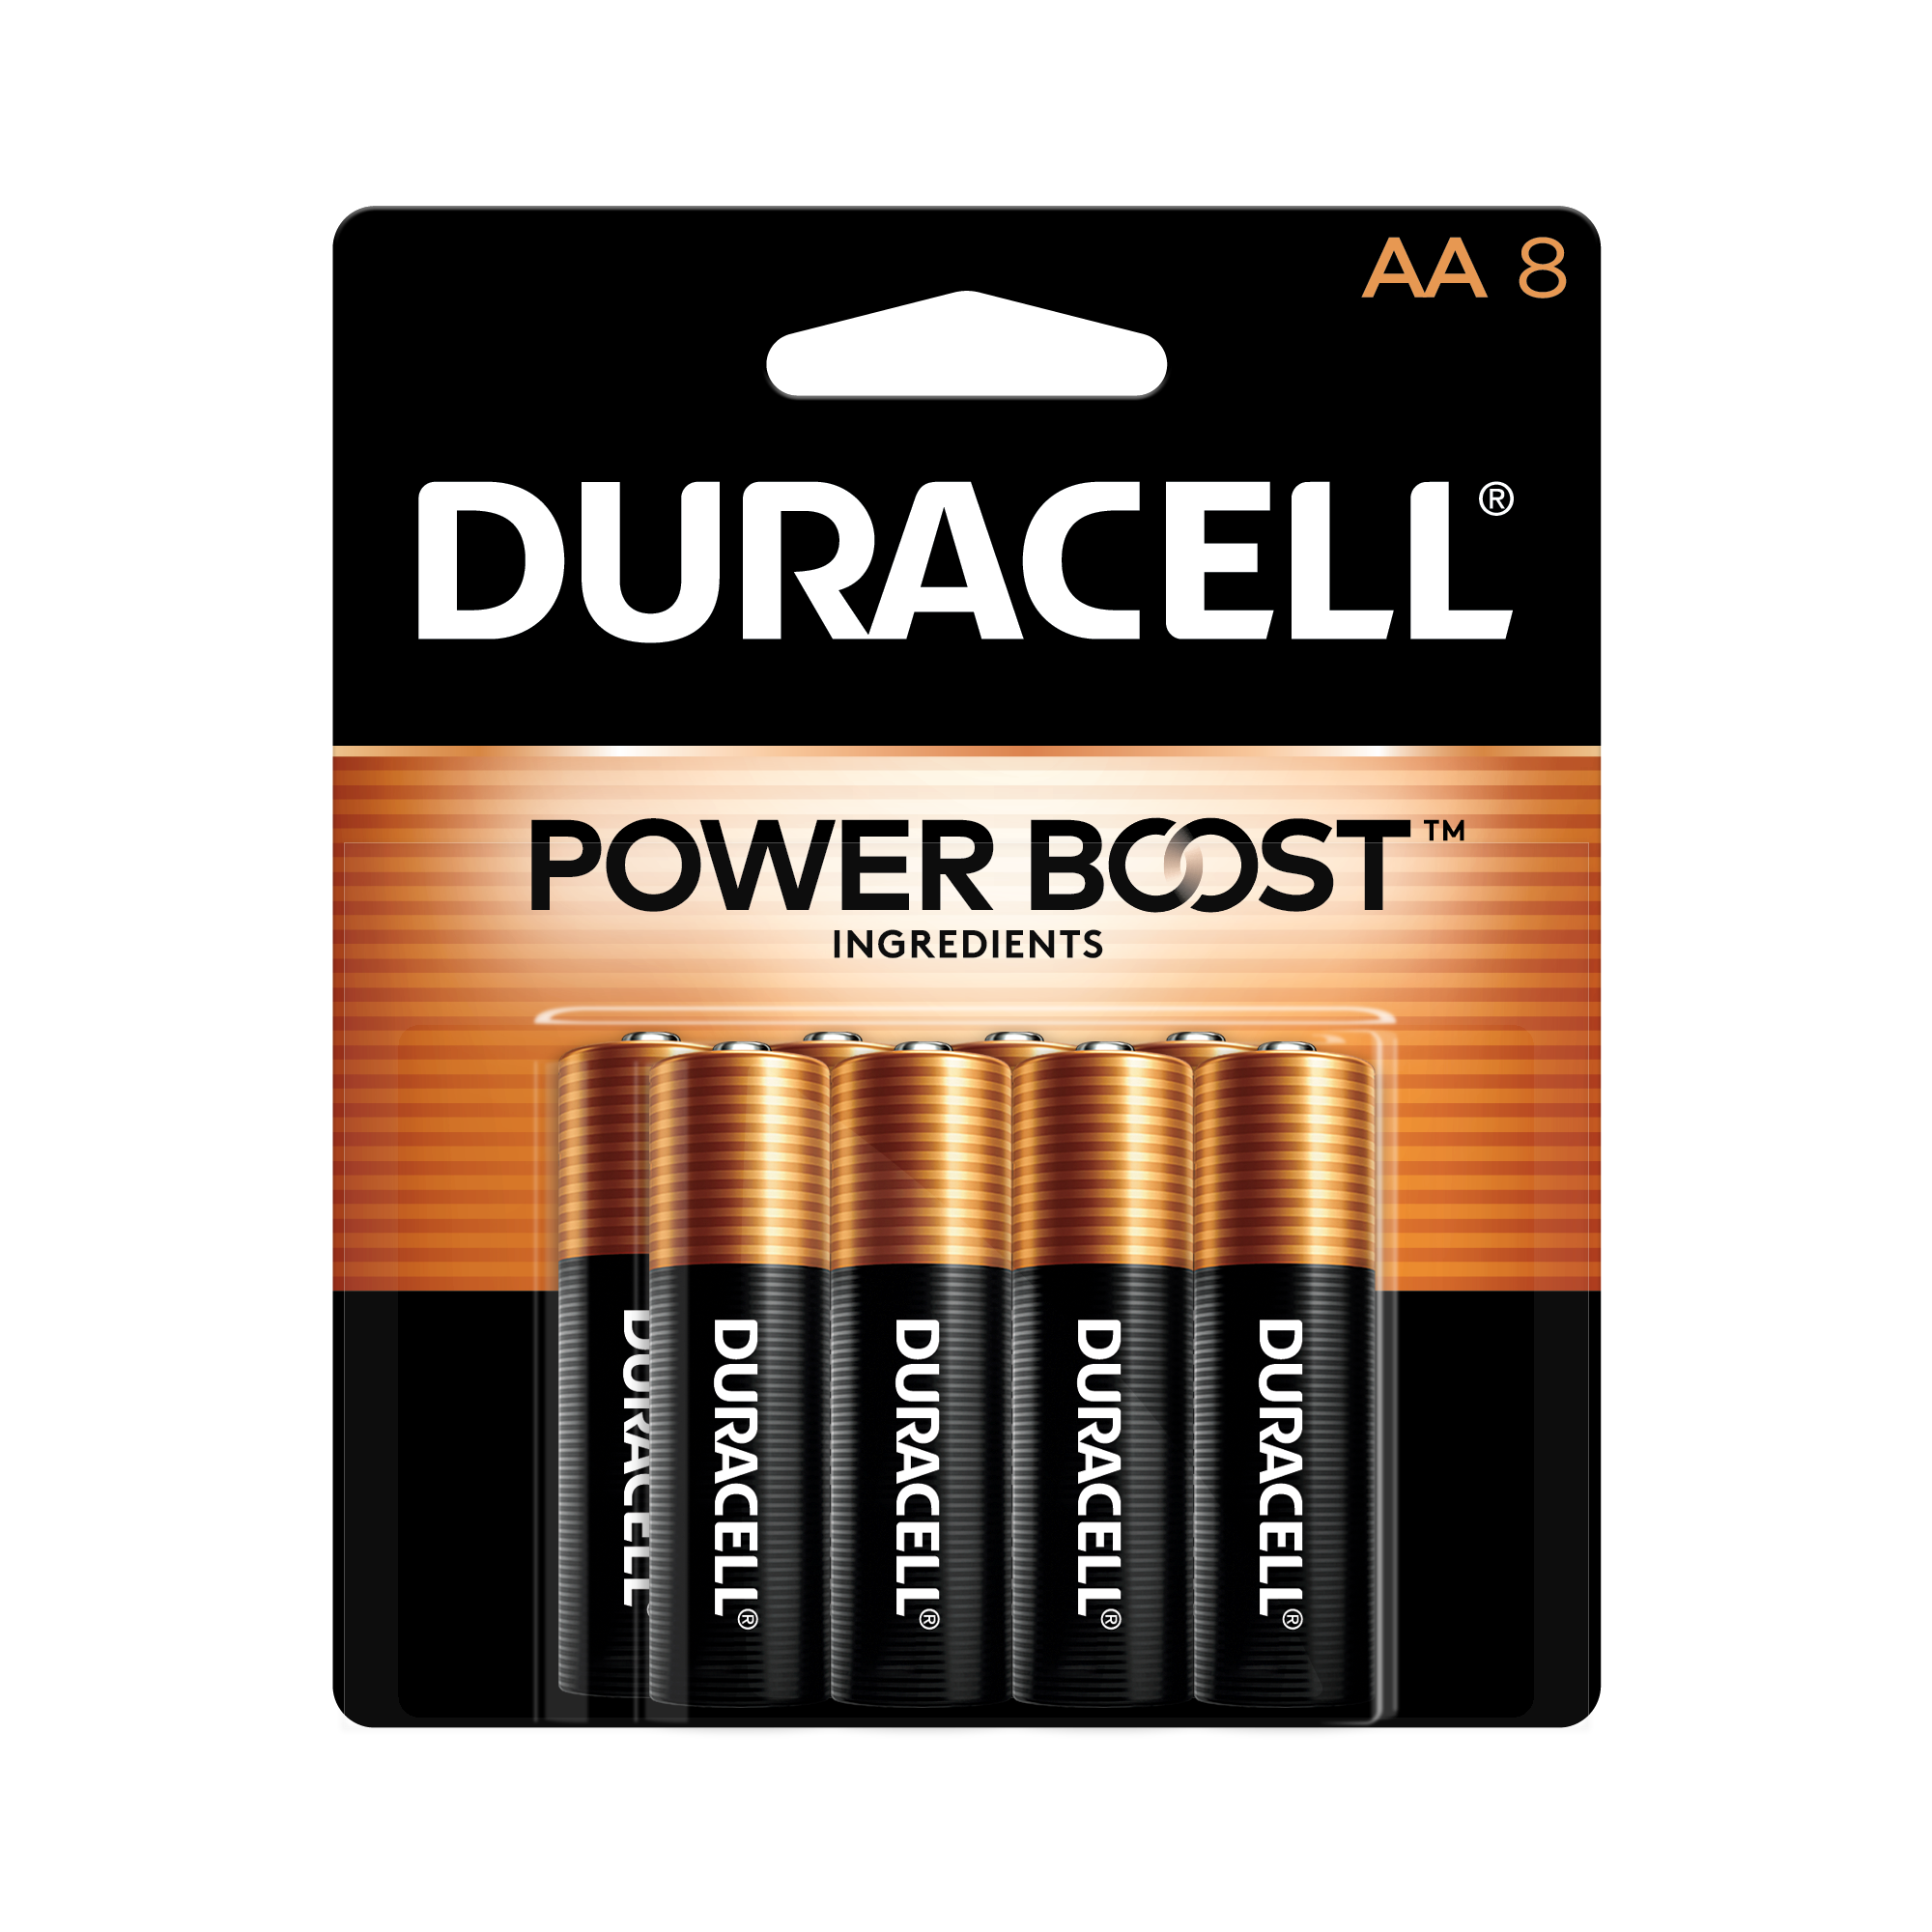 Duracell Coppertop AA Battery with POWER BOOST™, 8 Pack Long-Lasting Batteries - image 4 of 9